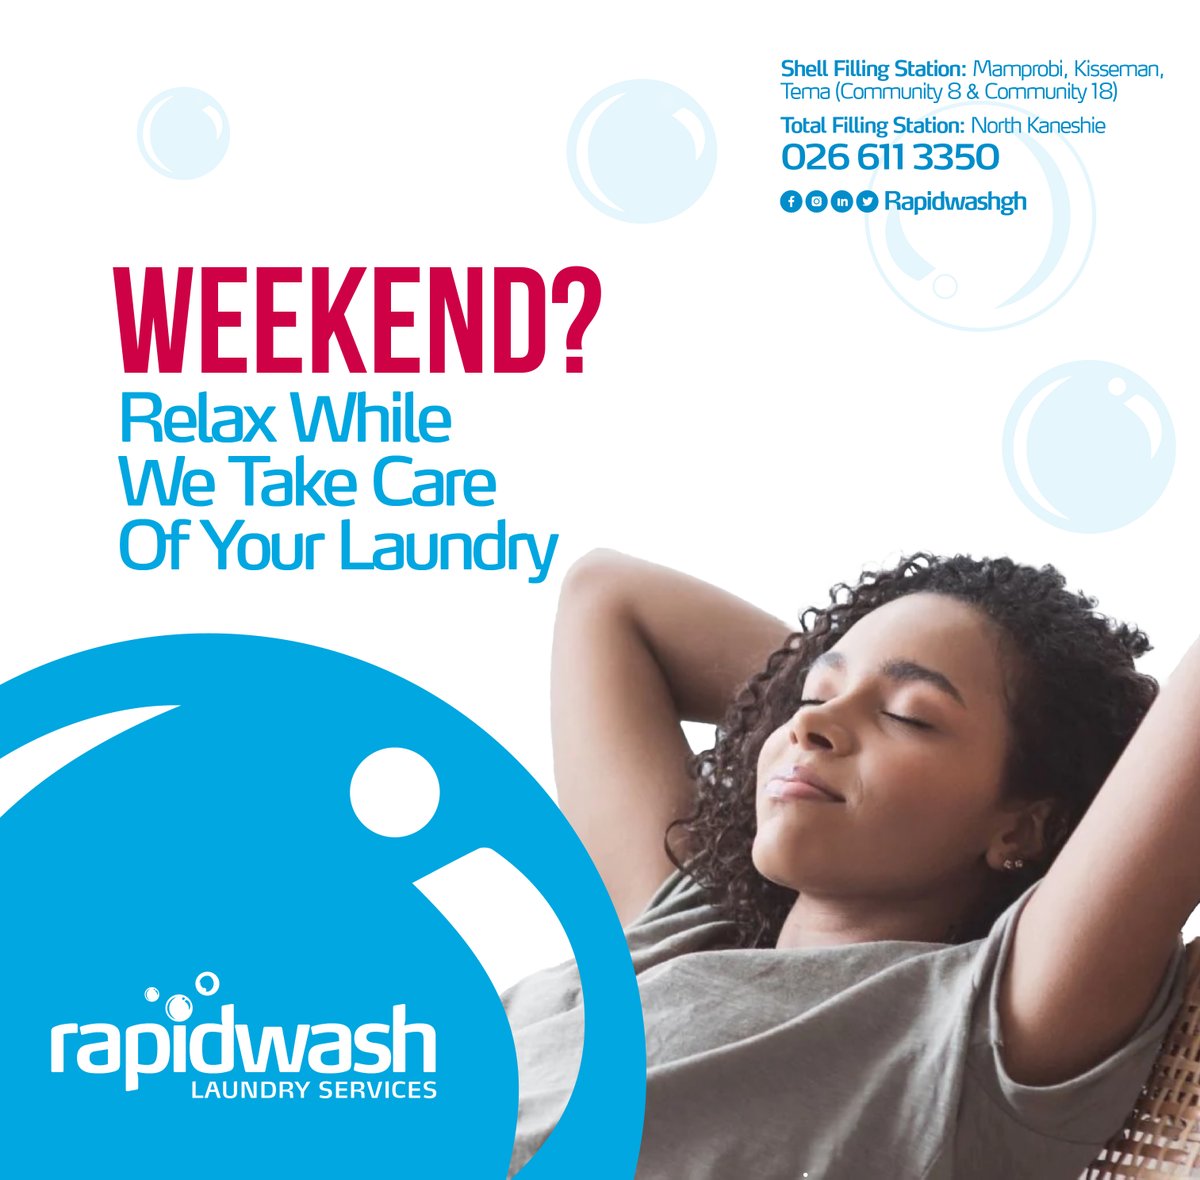 The weekend is HEREEEEEEE!!!!

Guess who's ready to do your laundry.
We are💃💃💃💃💃💃

Bring your clothes no matter the load!

#washmoreworryless #laundryservice #rapidwashtrain #affordable #convenient #ghana #shellfillingstation #laundry #clothes